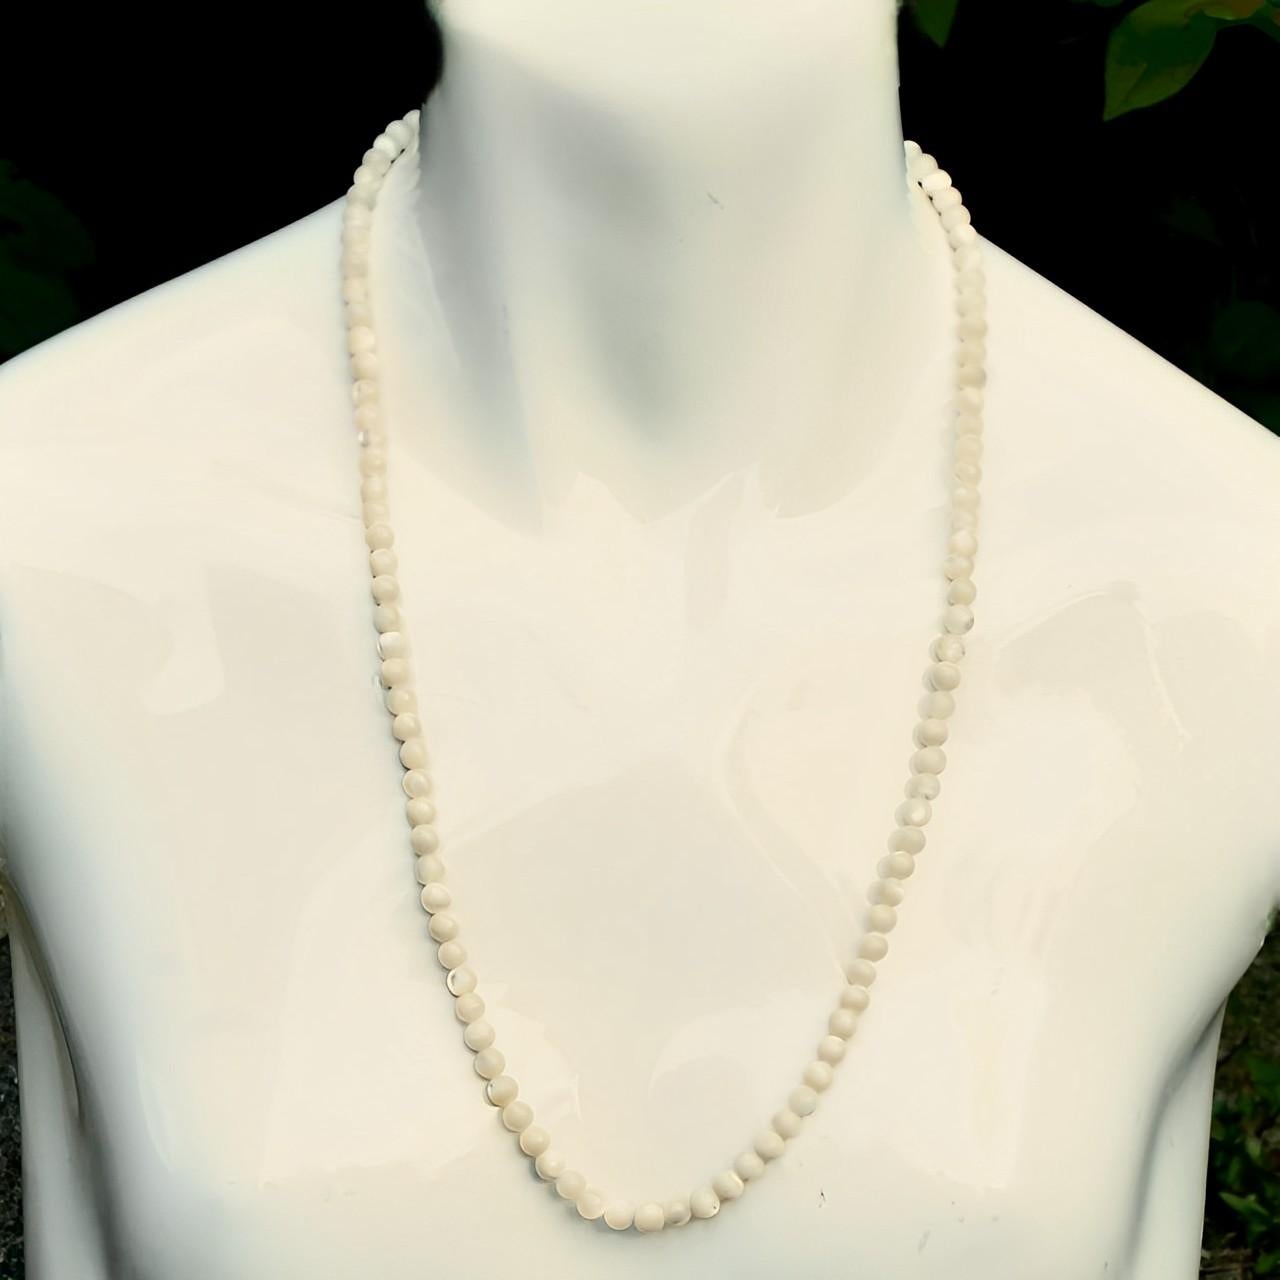 Lovely mother of pearl necklace with round beads and a silver clasp stamped 'sterling'. Measuring necklace length 62.5 cm / 24.6 inches, and the beads are 5.75 mm / .22 inch. The silver clasp works well. The necklace is in very good condition.

This